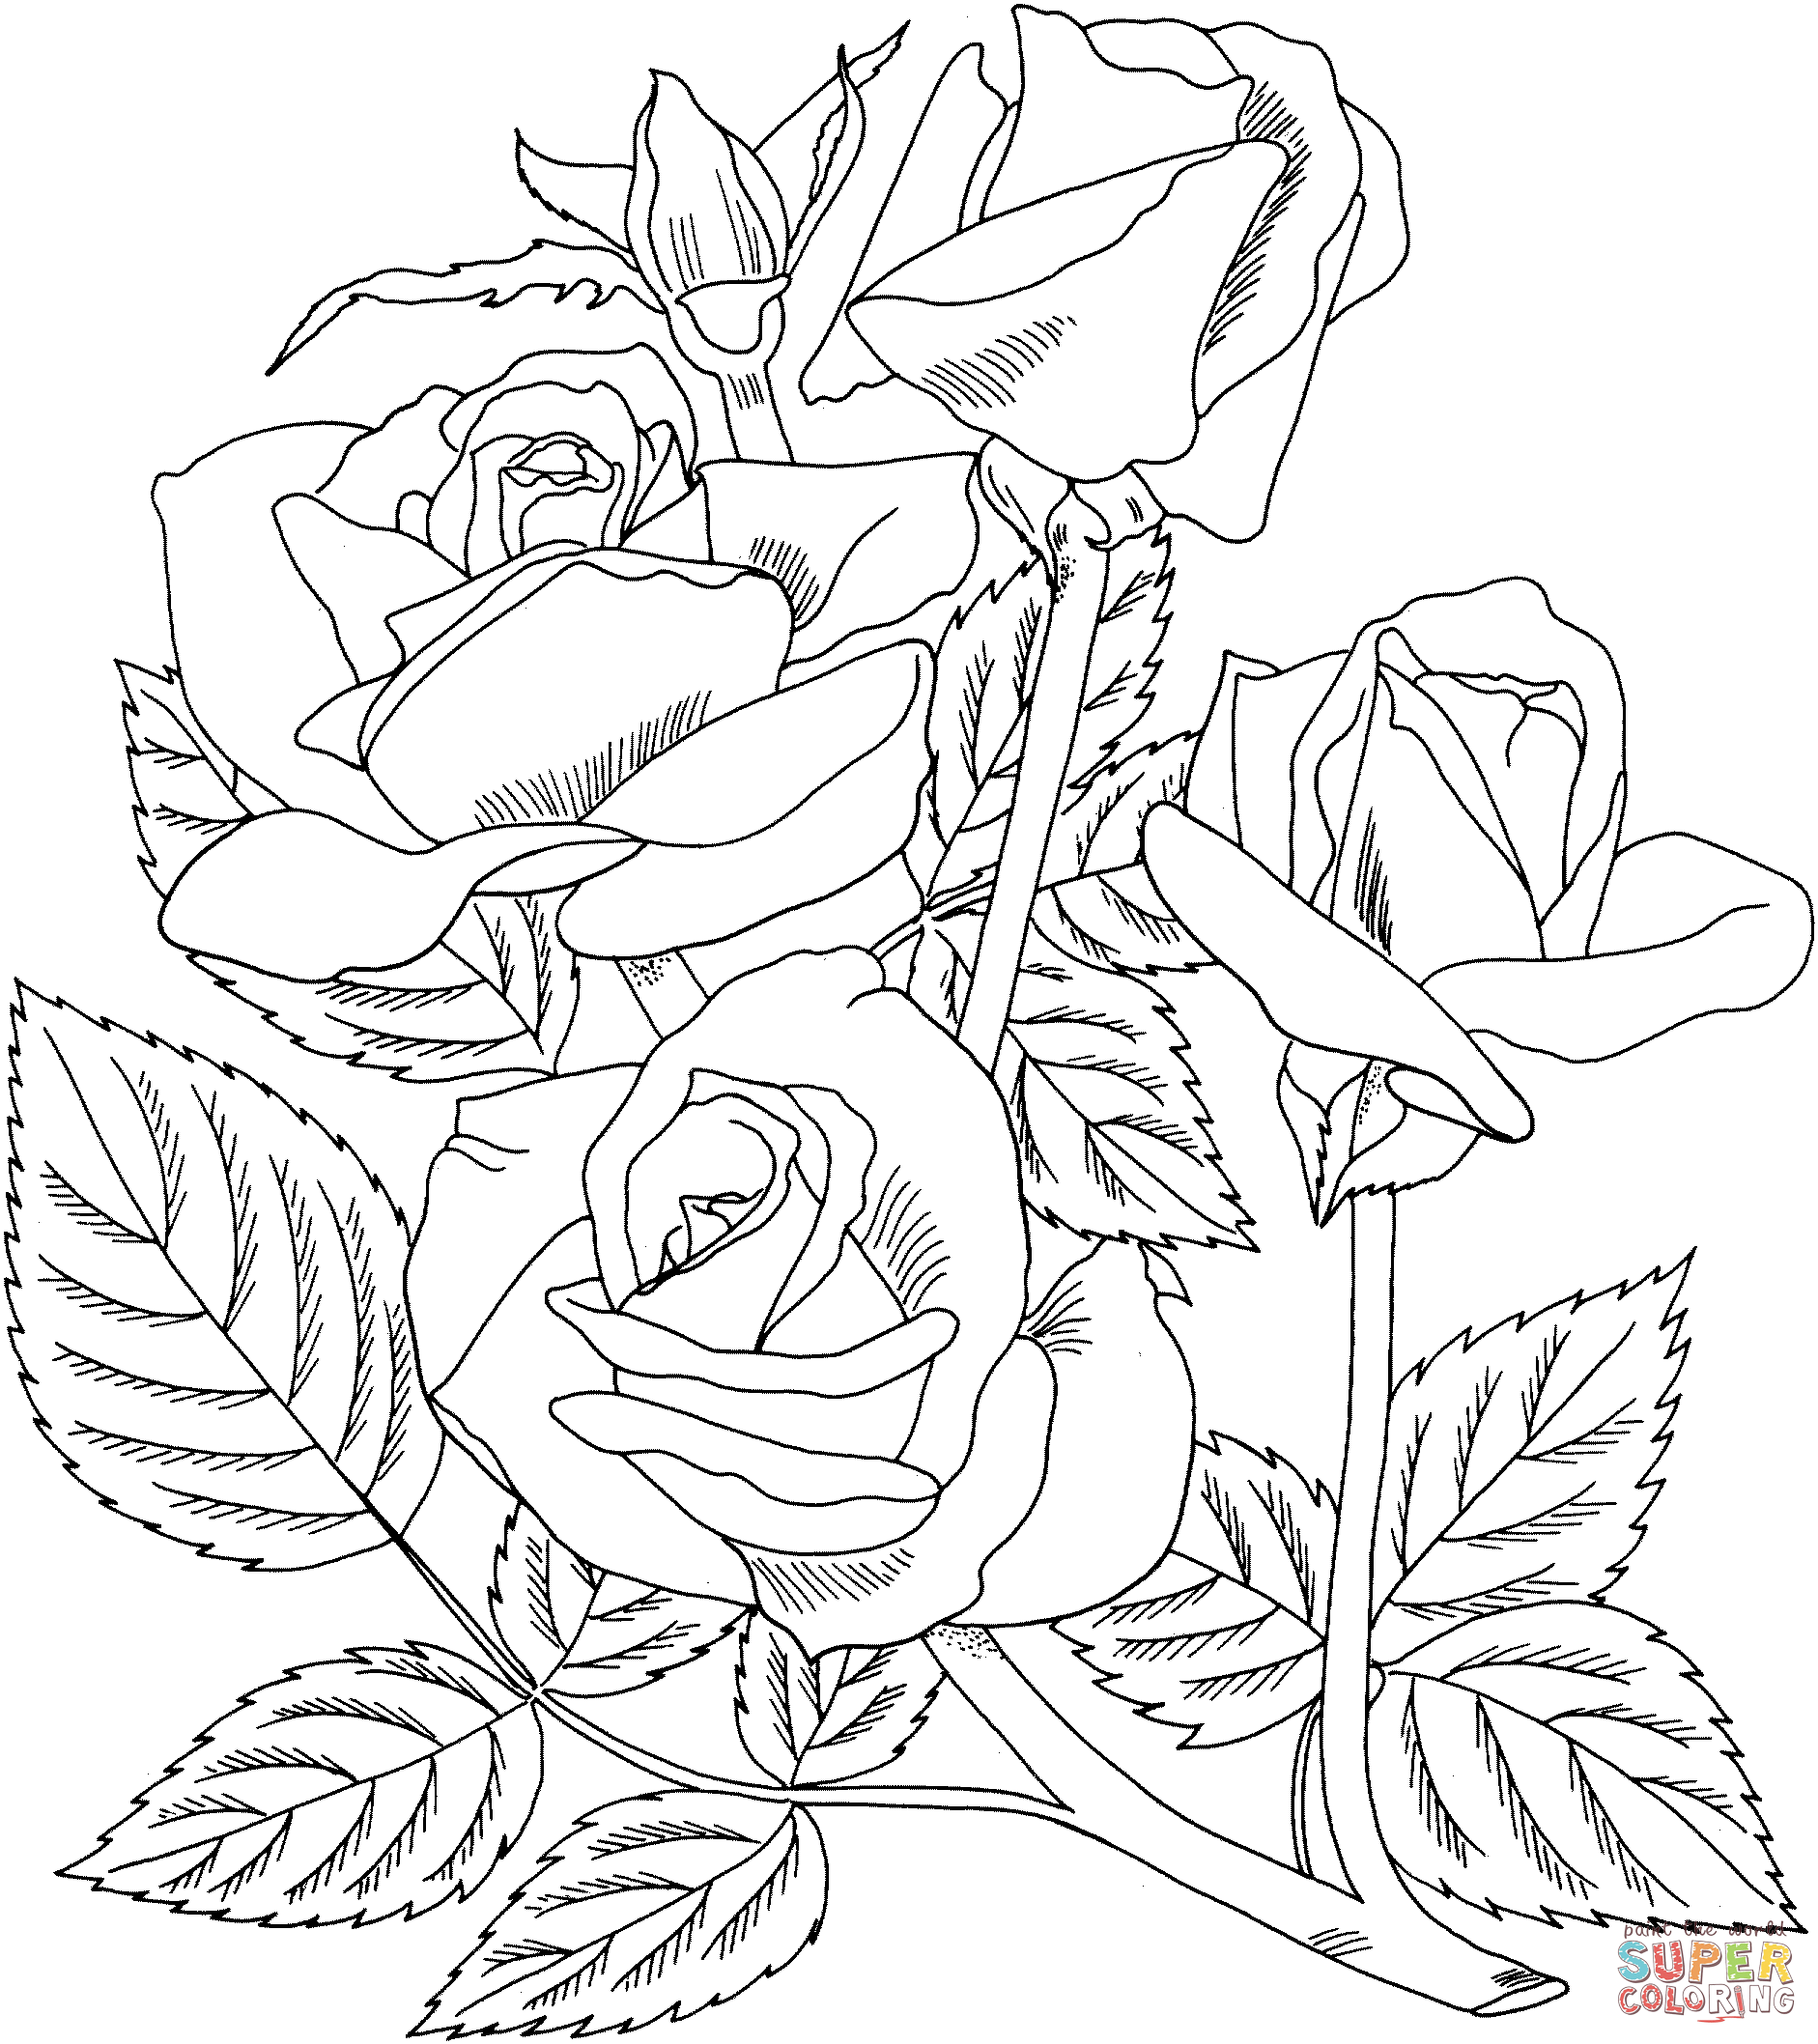 Arizona Grandiflora Rose Coloring Pages   Roses Coloring Pages ...